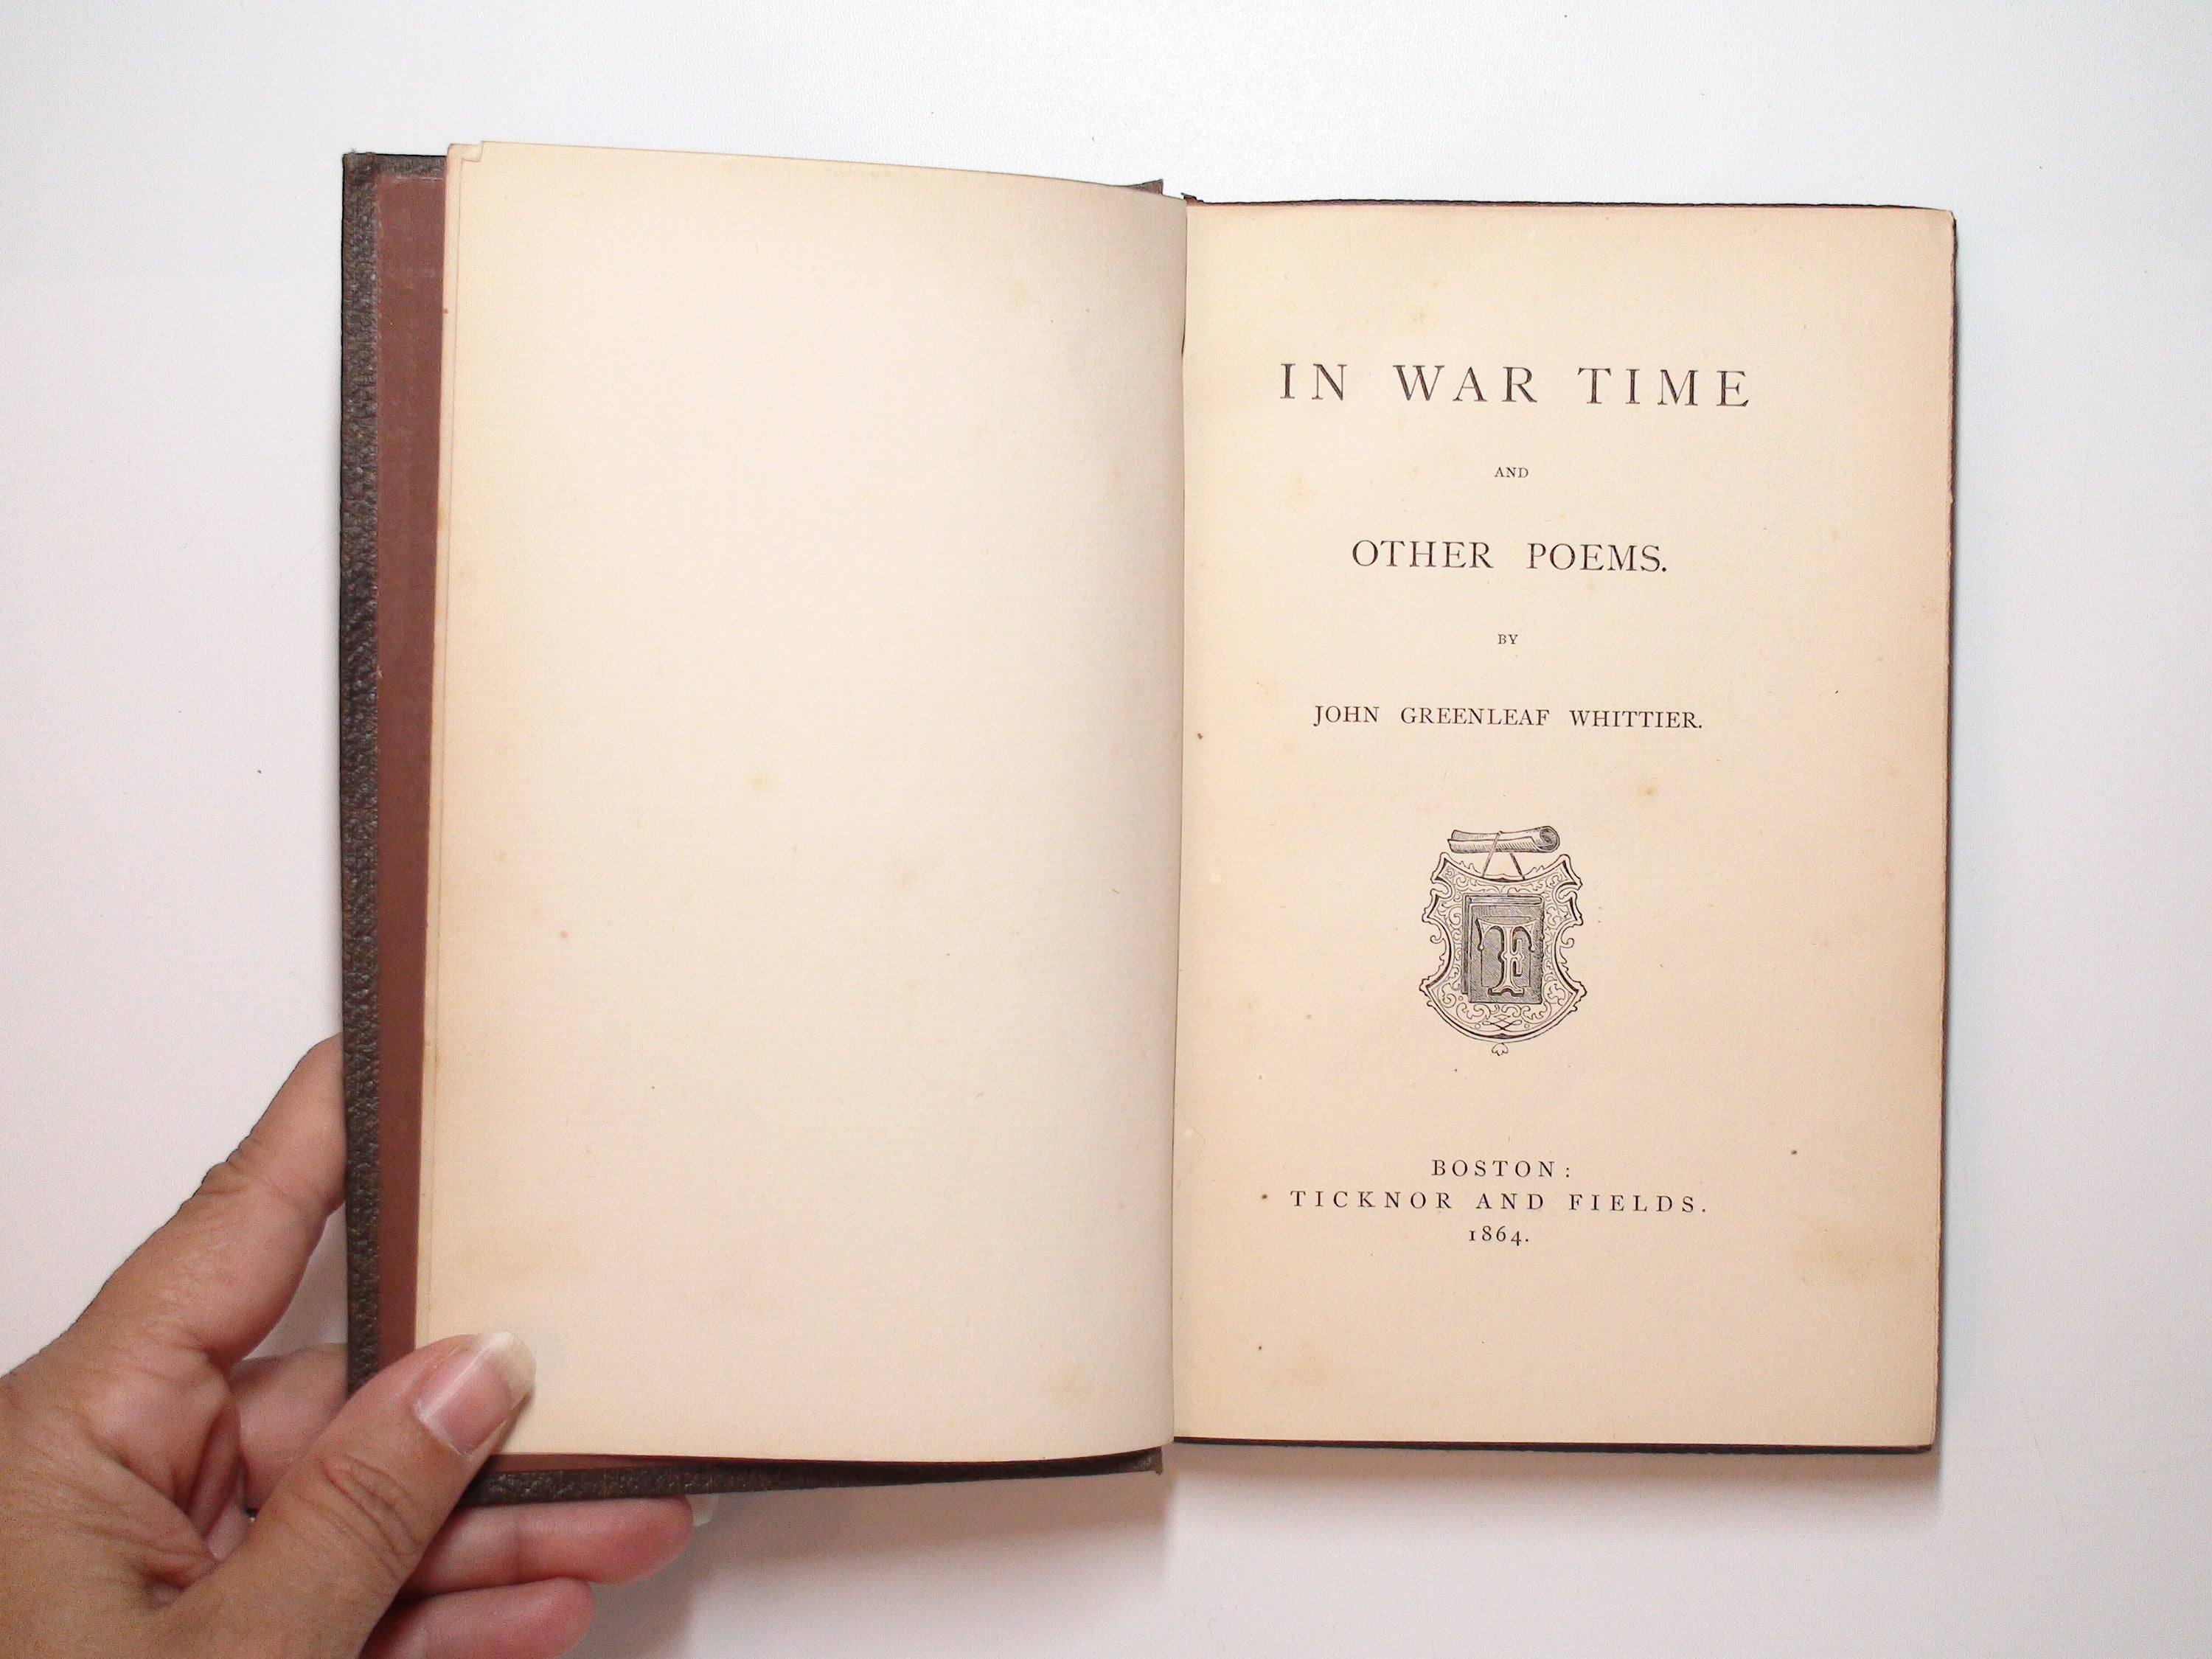 In War Time and Other Poems by John Greenleaf Whittier, 1st Ed, 1864